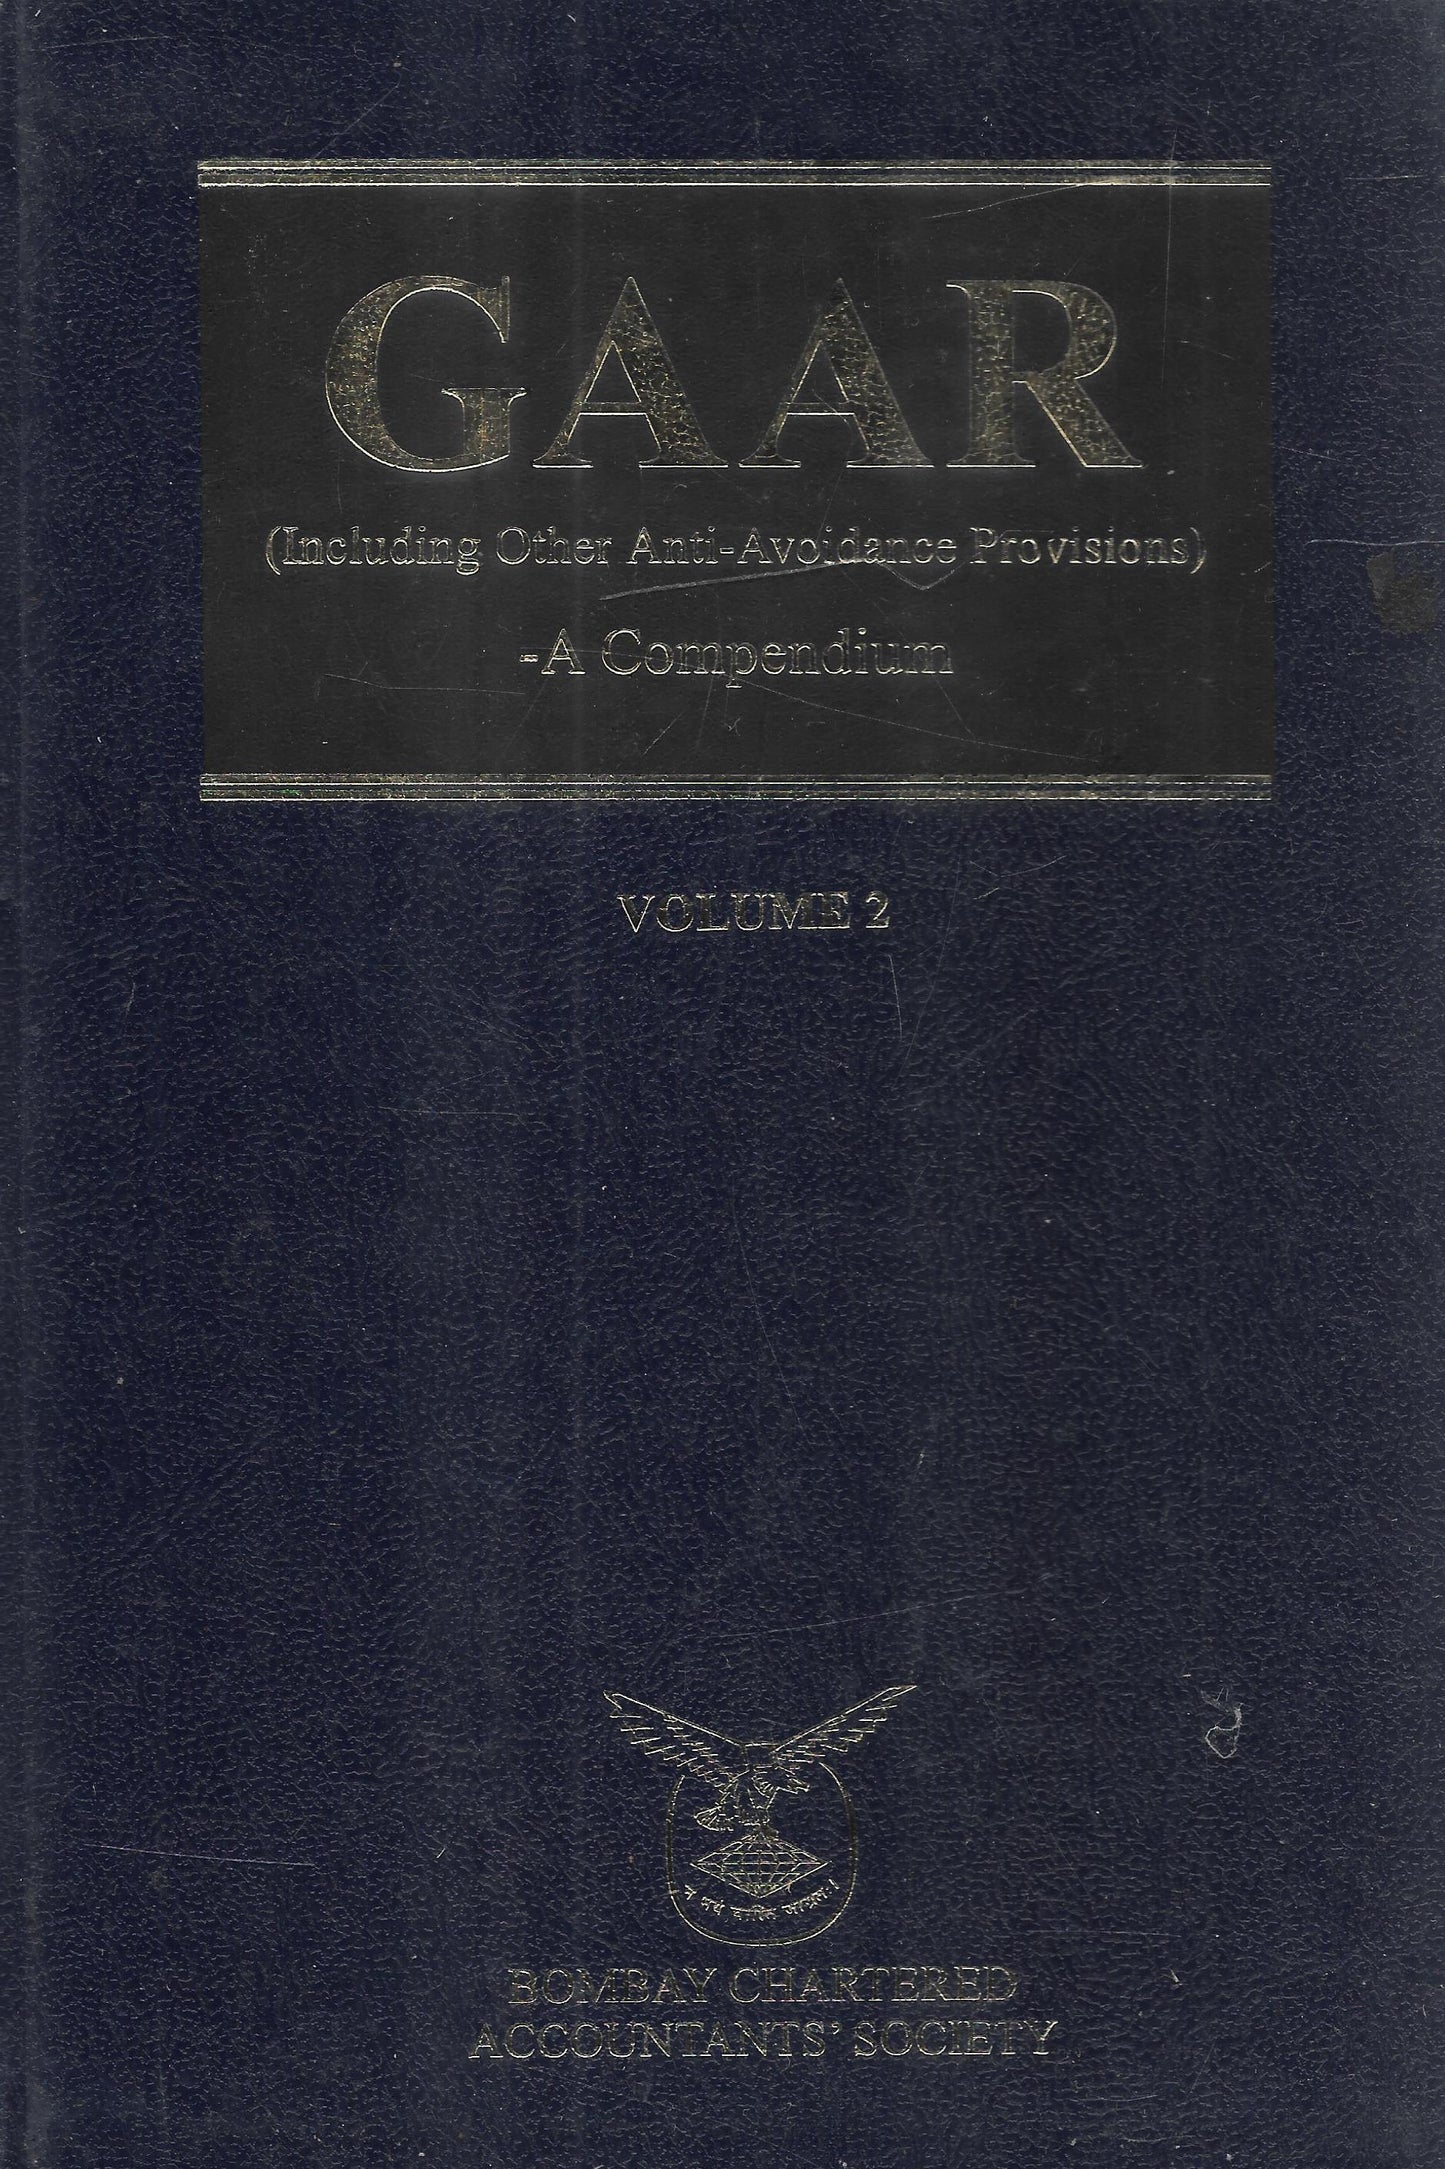 GAAR (Including other Anti-Avoidance Provisions) – A Compendium-Volume 1 & Volume 2